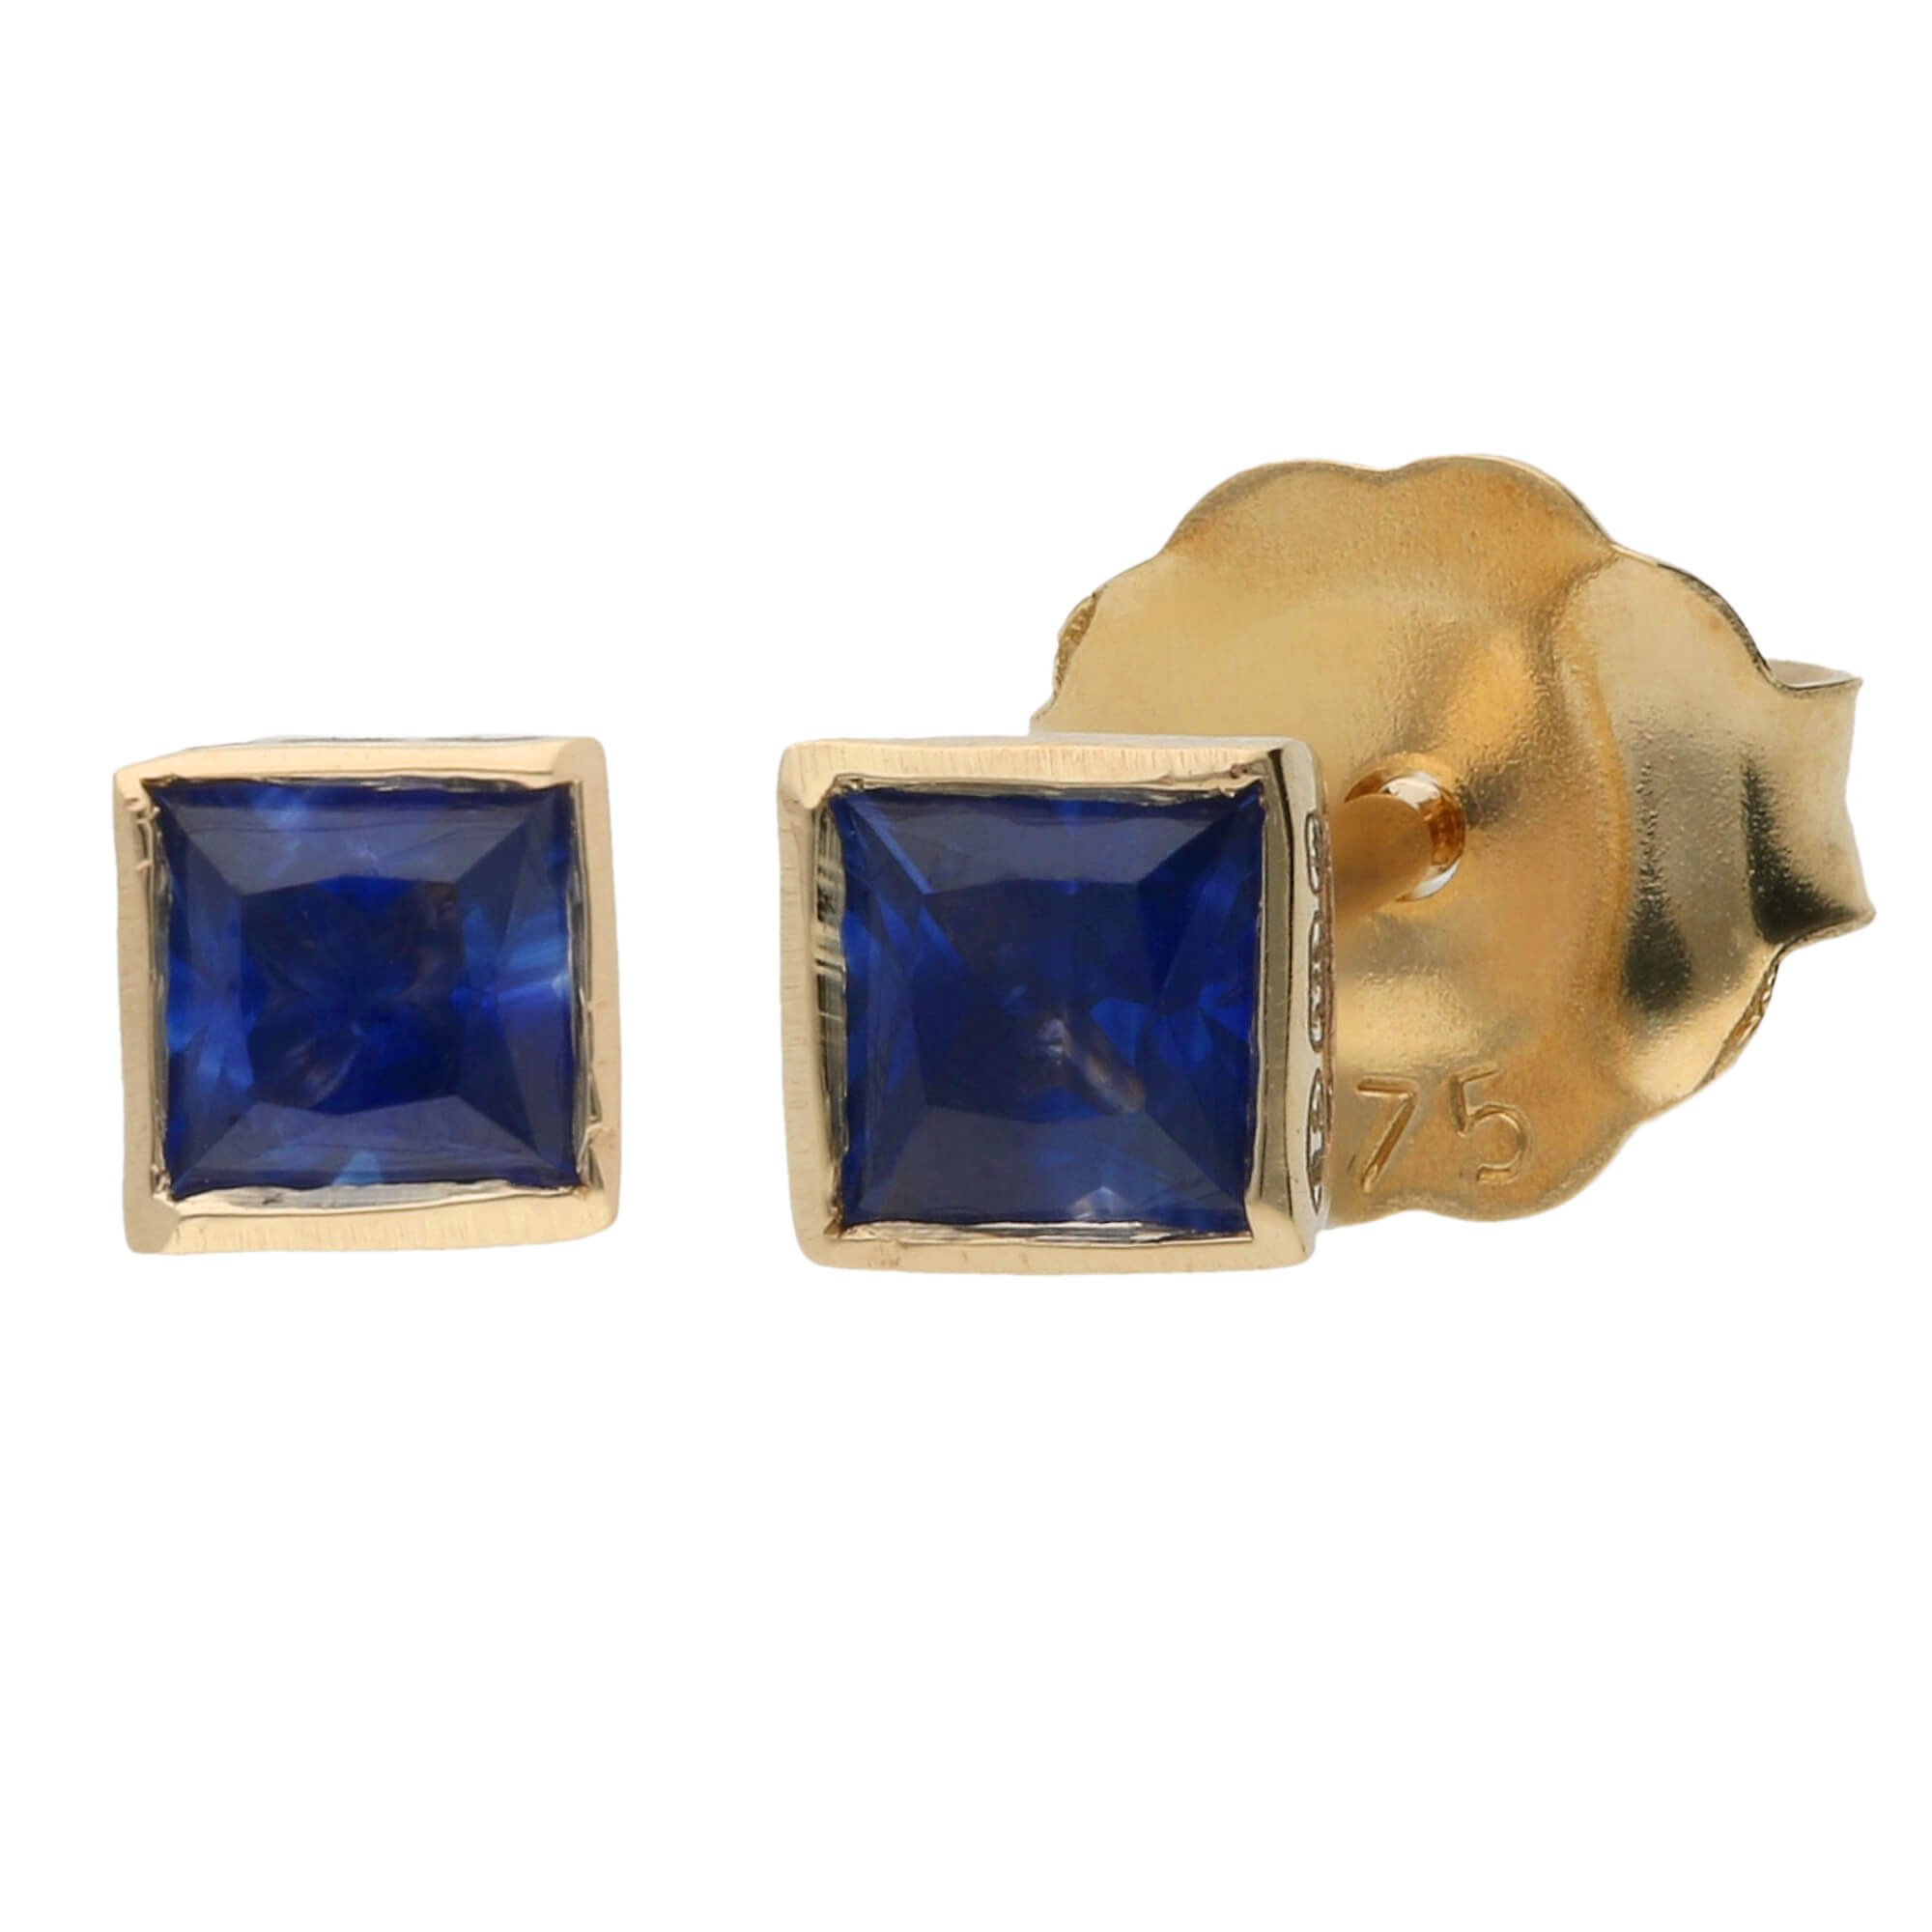 6mm Estate New 14k Yellow Gold Created 1ct Tanzanite or Sapphire Earrings Studs GE16-3